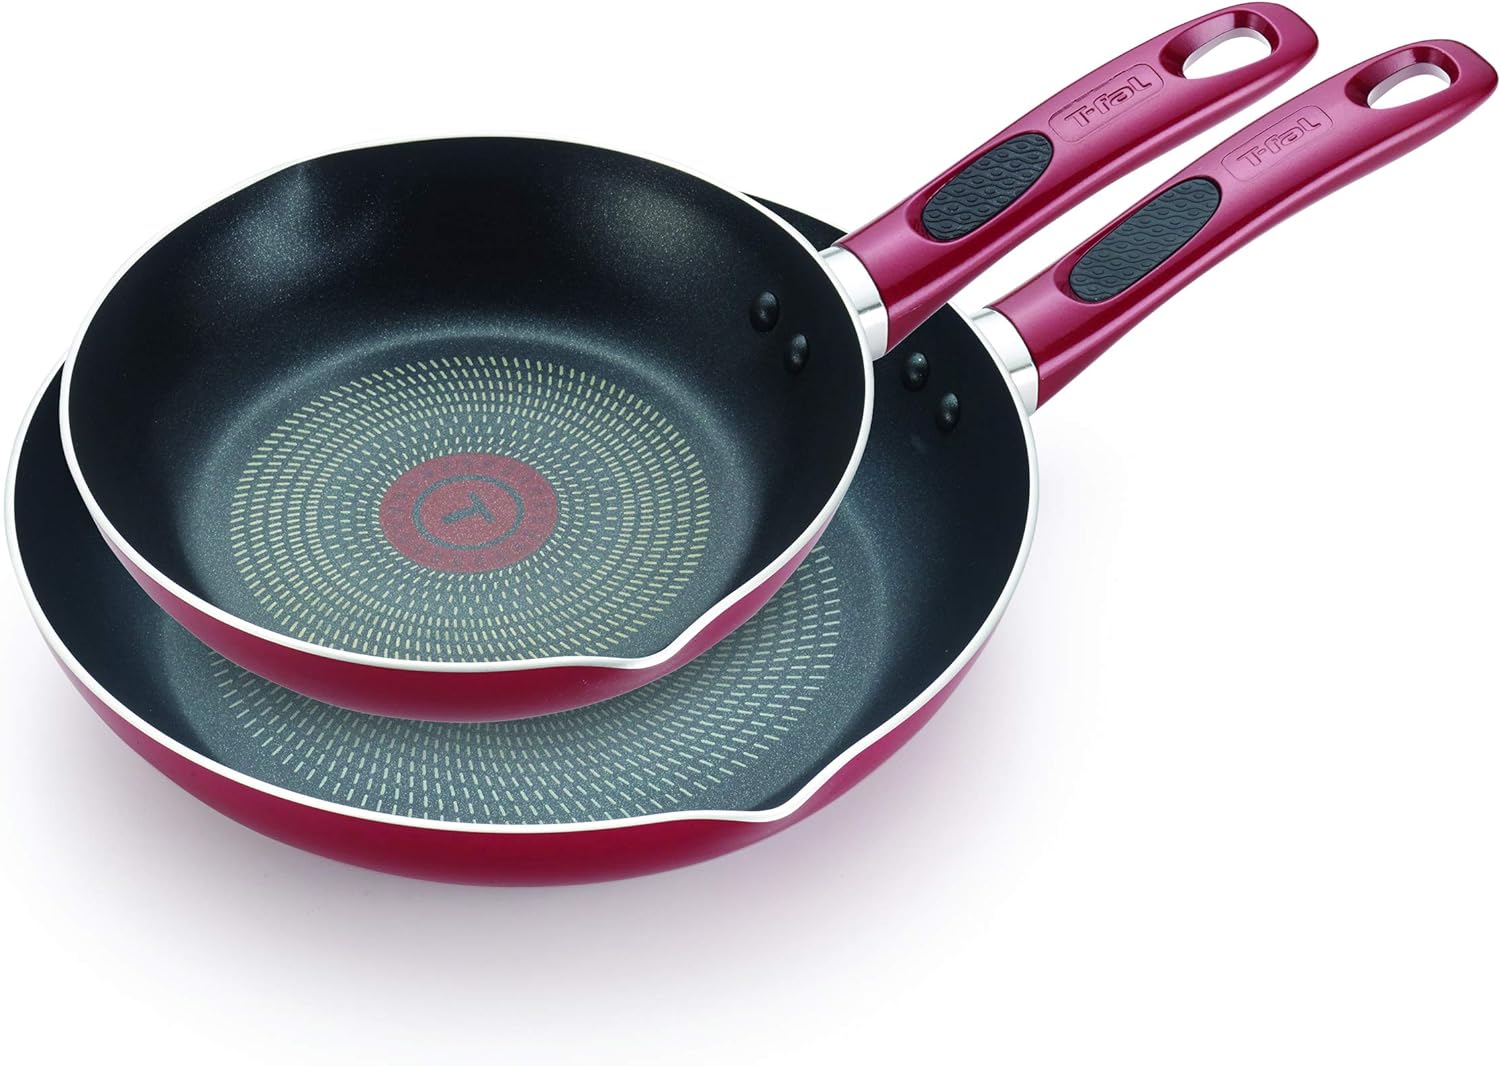 T-fal B039S264 Excite ProGlide Nonstick Fry Pan Cookware Set Review